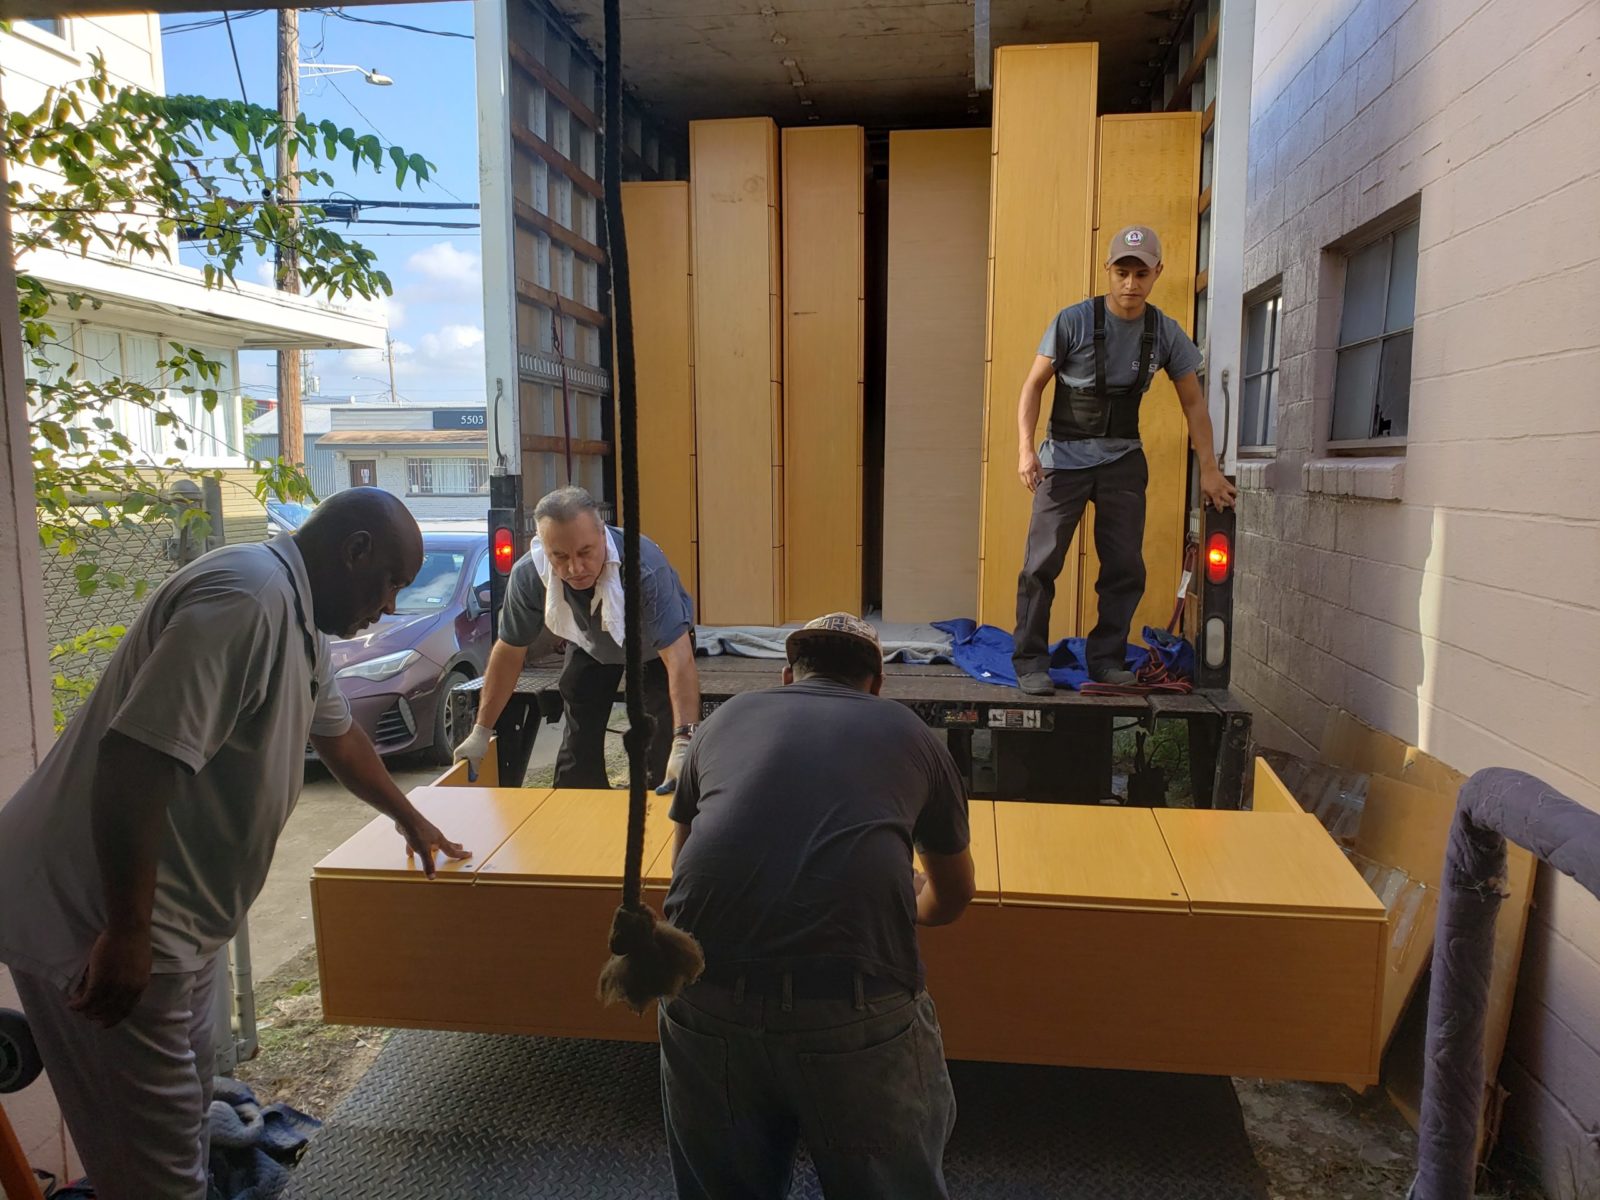 Furniture coming off truck